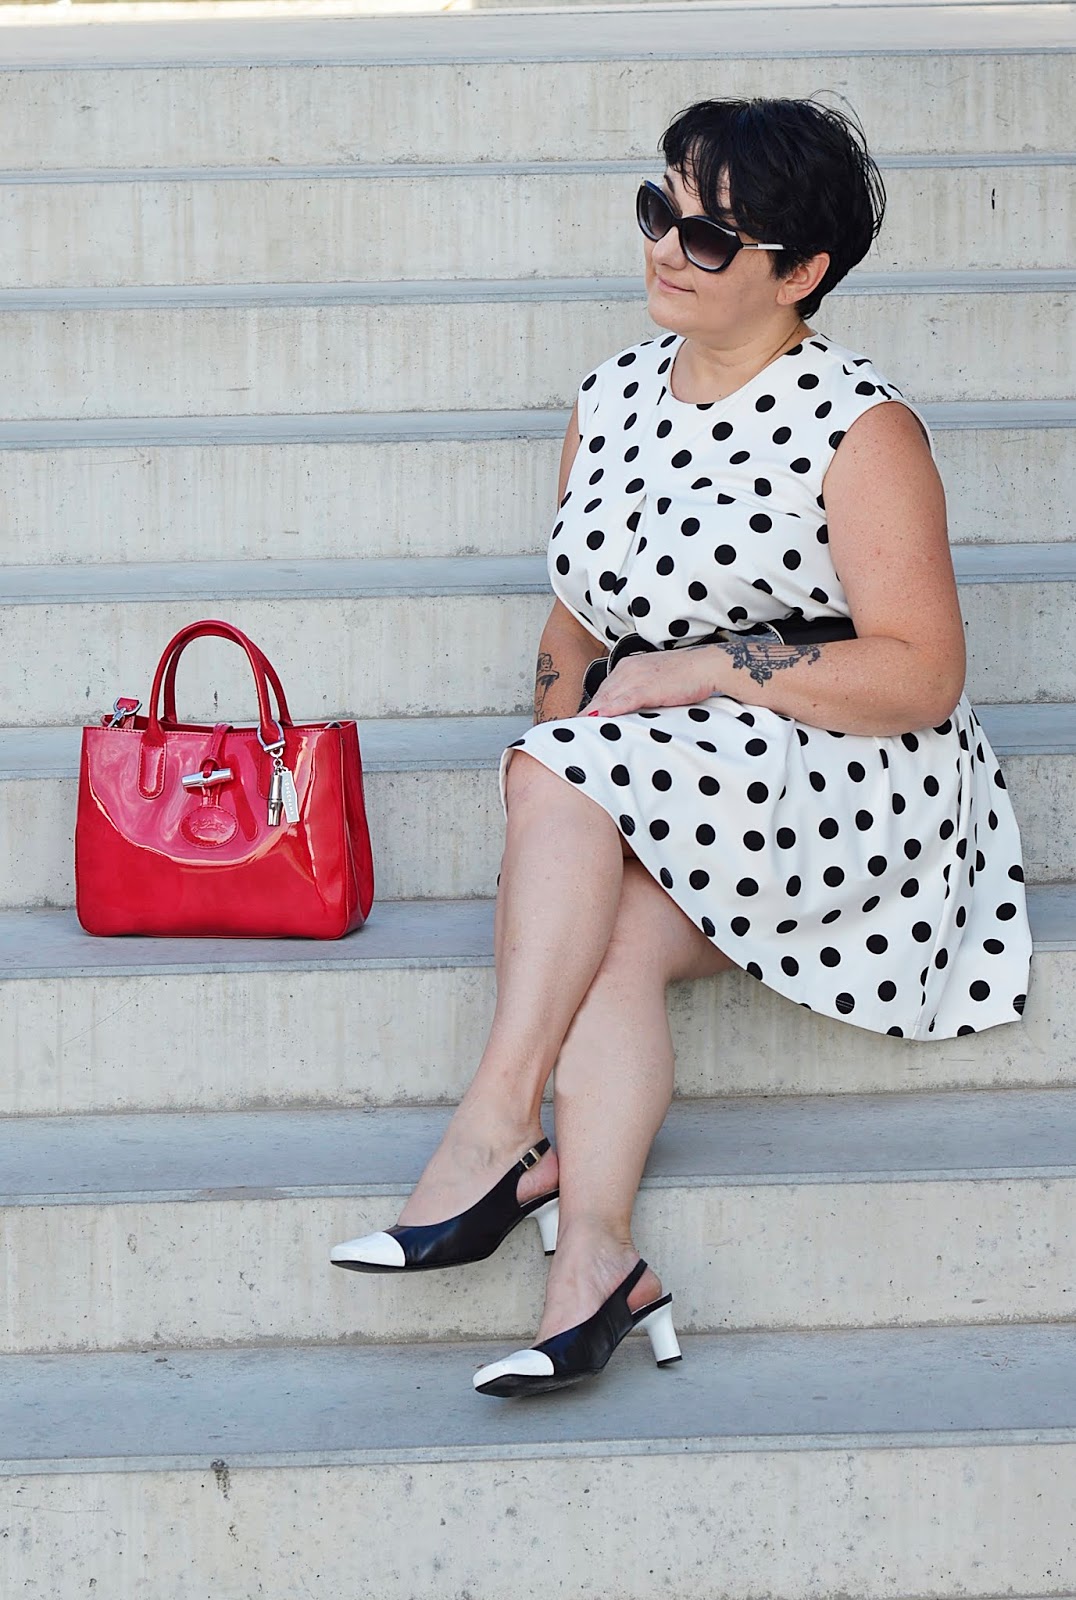 Black and white polka dots dress, black and white style